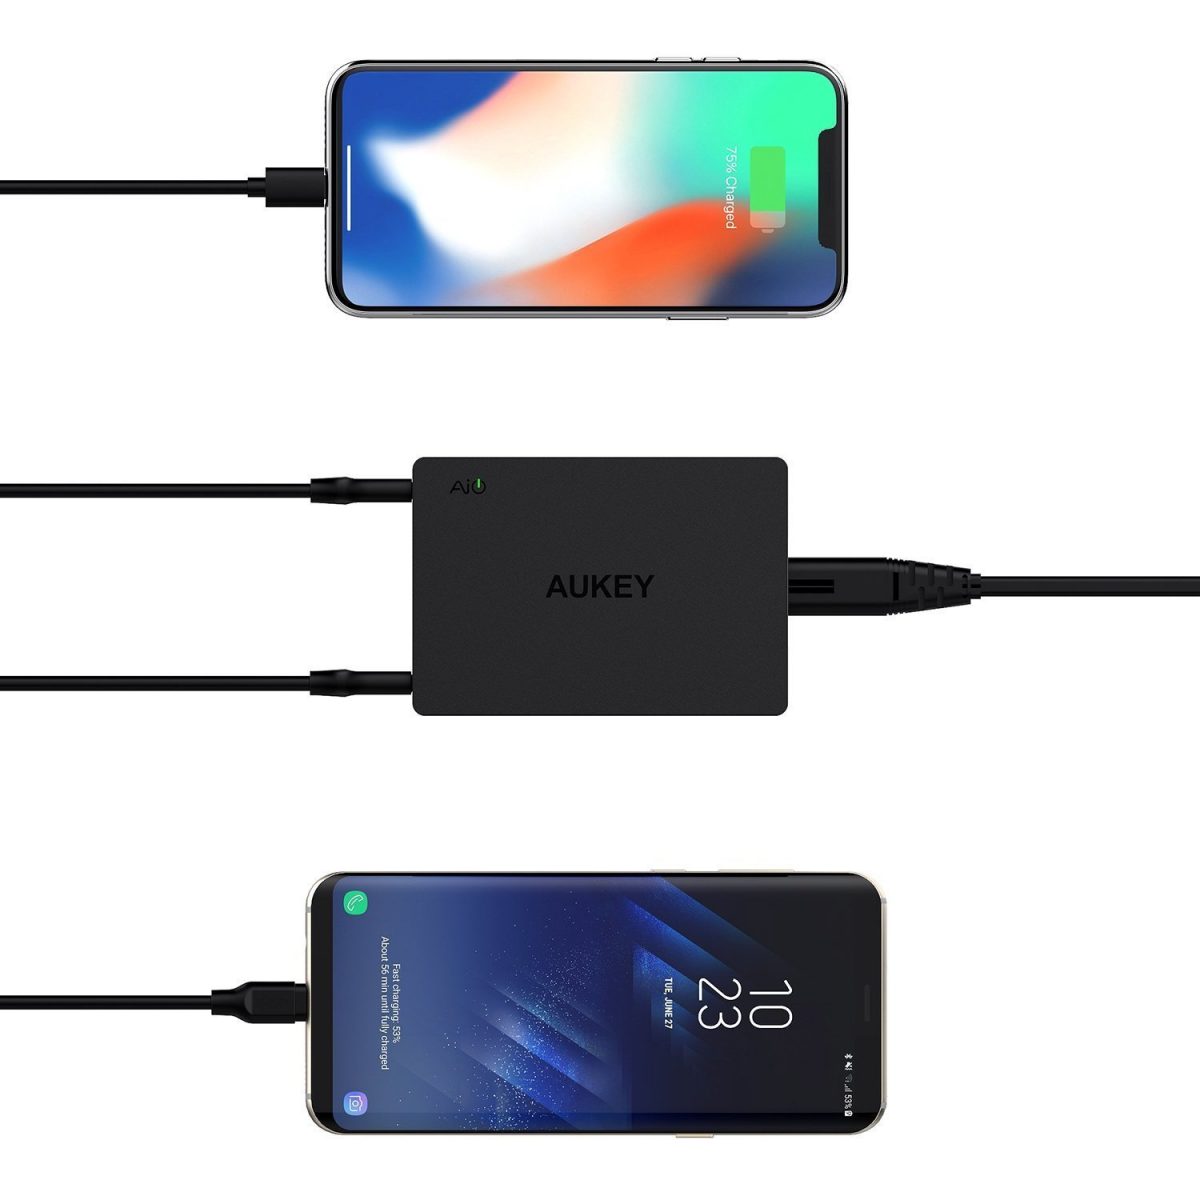 usb charger quick charge 3.0 Alice Bonasio VR Consultancy MR Tom Atkinson Tech Trends Review AR Mixed Virtual honor 7x Wileyfox Swift 2+ Add-x Aukey 1080